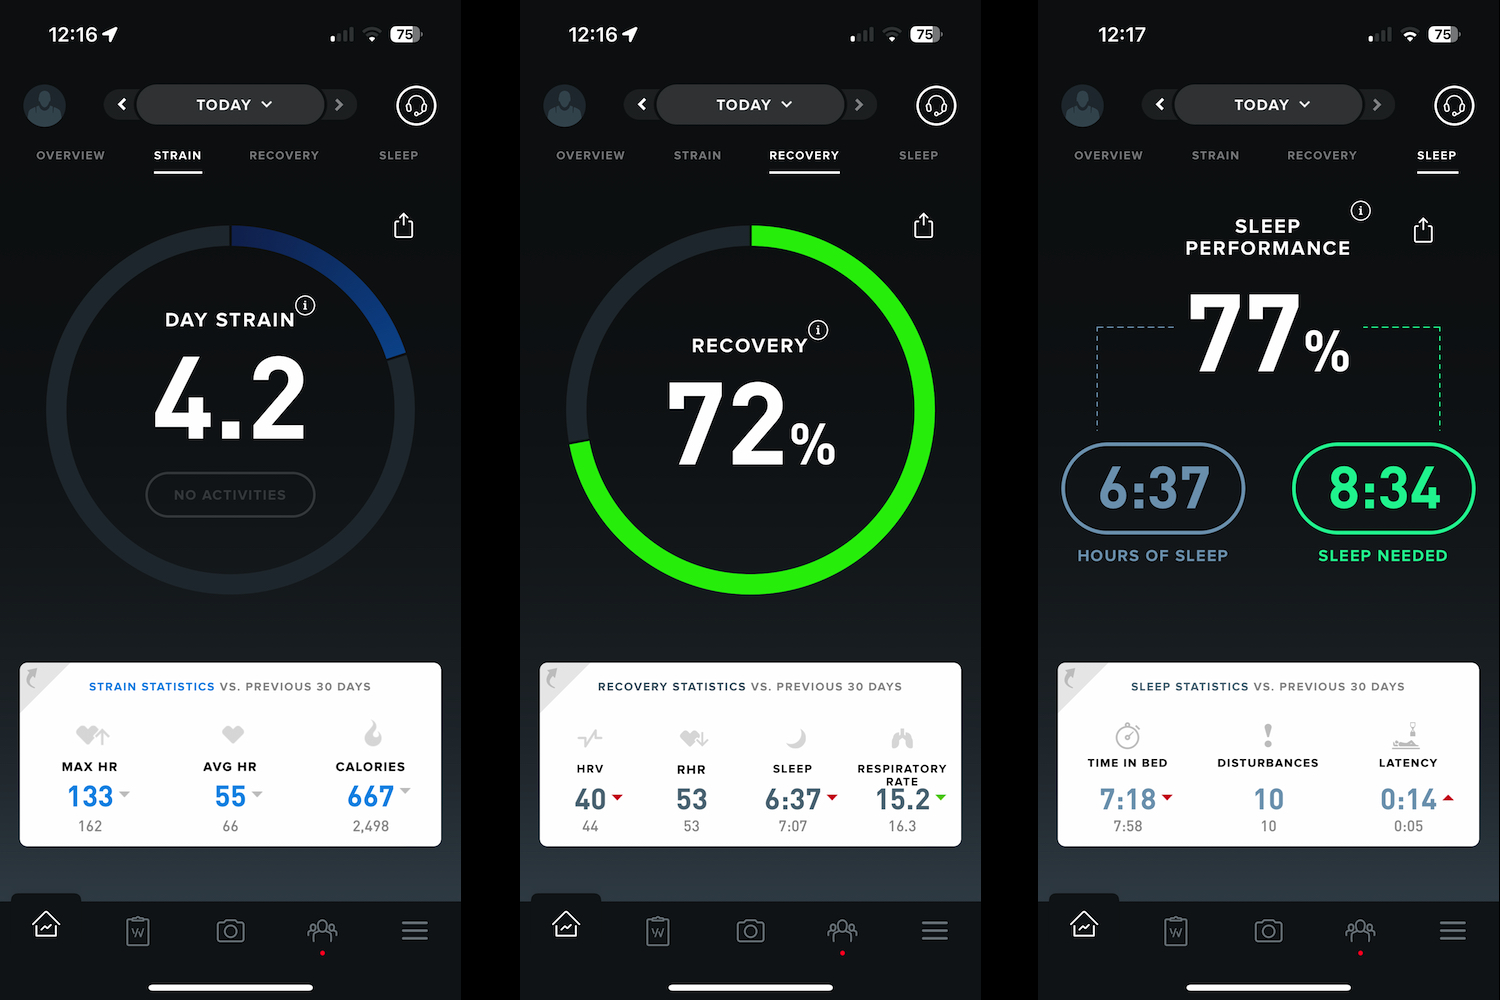 Screenshots showing the Whoop 4.0's app and data.